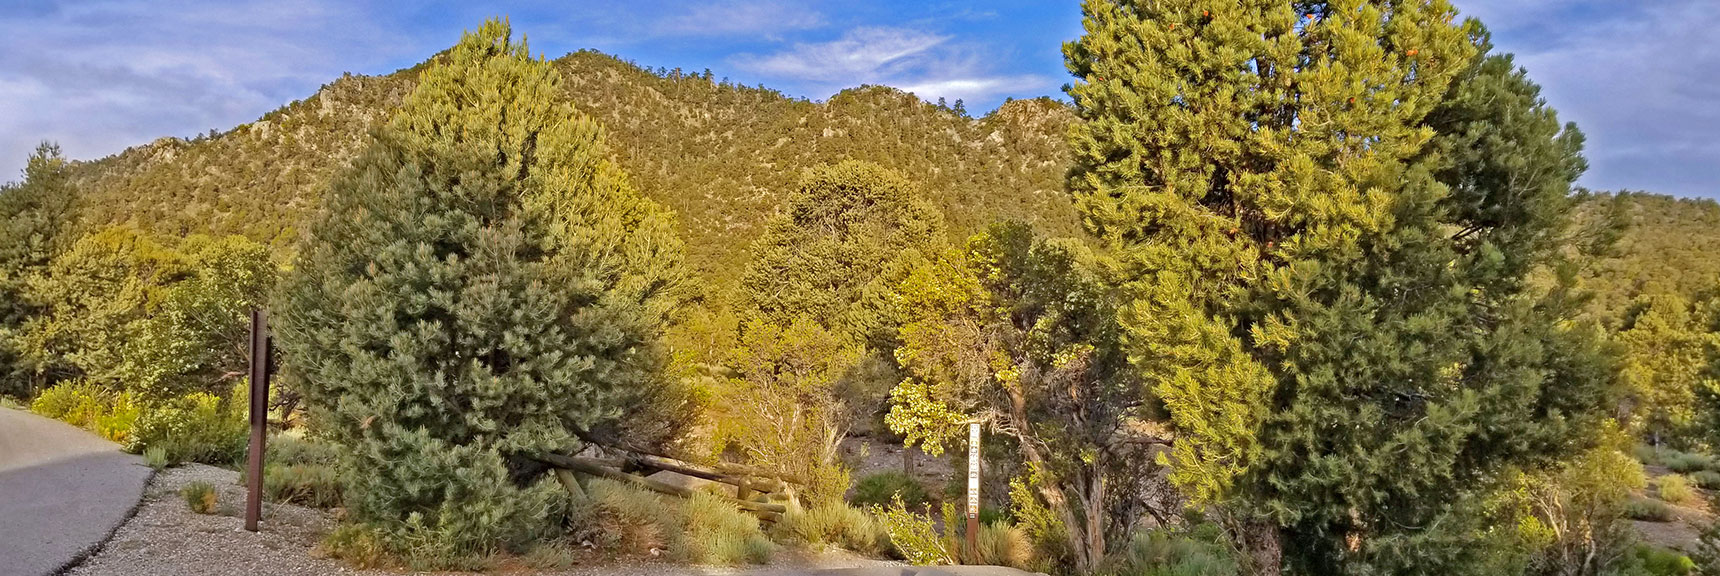 Sawmill Trailhead (yellow) begins here. Background Hills are Reference Point.| Pinyon Pine Loop Trail | Sawmill Trailhead | Lee Canyon | Mt Charleston Wilderness | Spring Mountains, Nevada